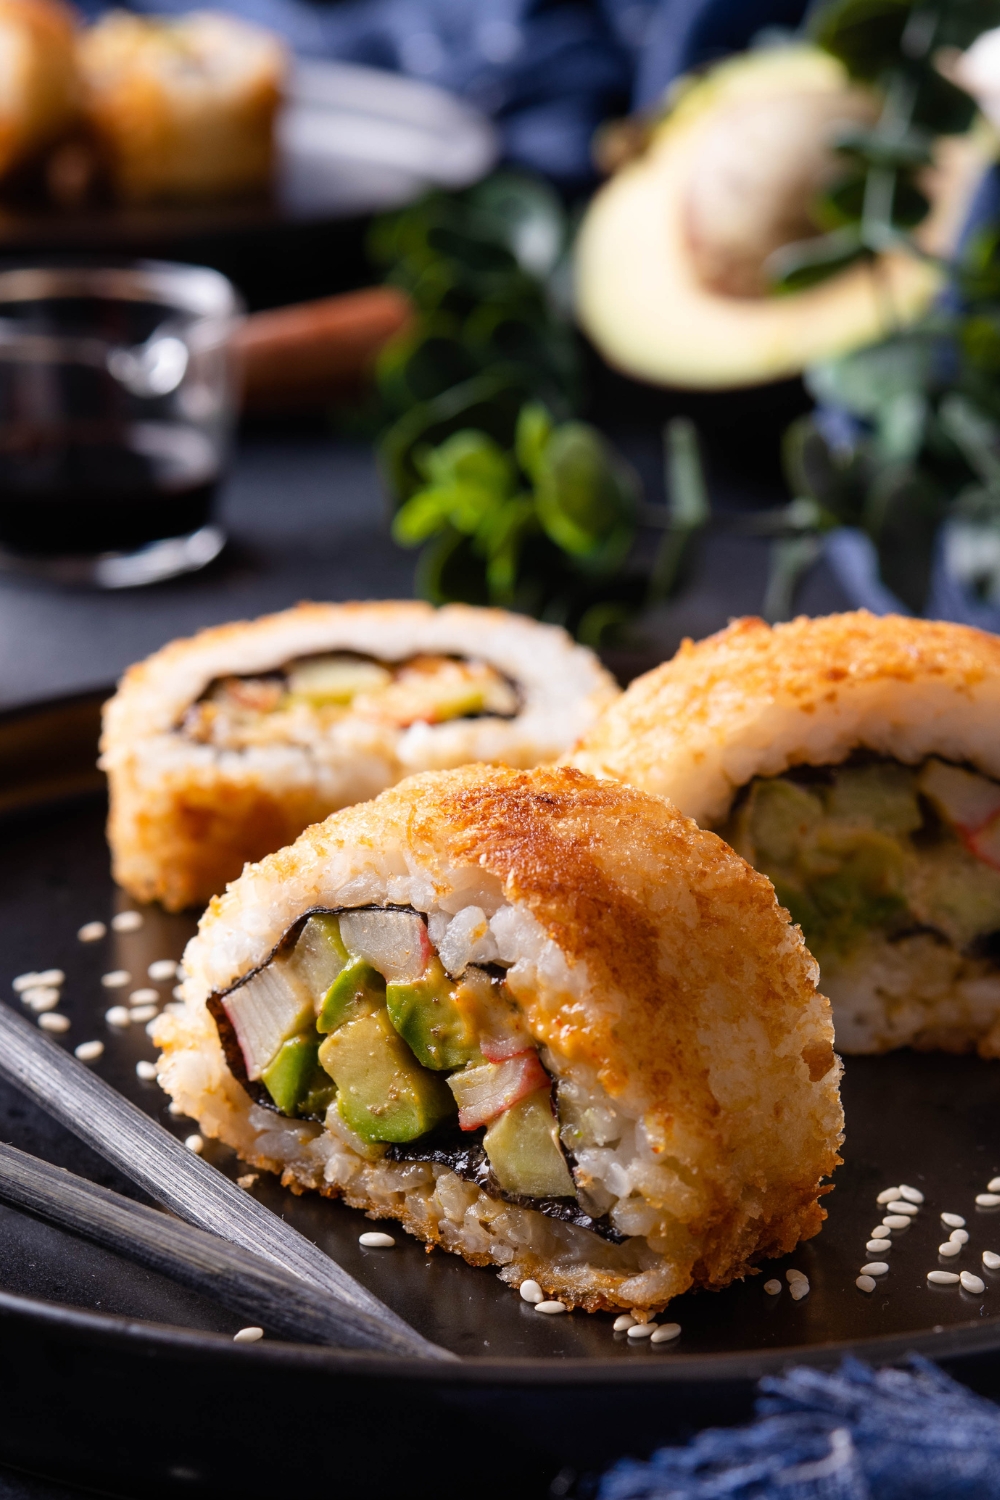 A close-up of fried sushi on a plate.